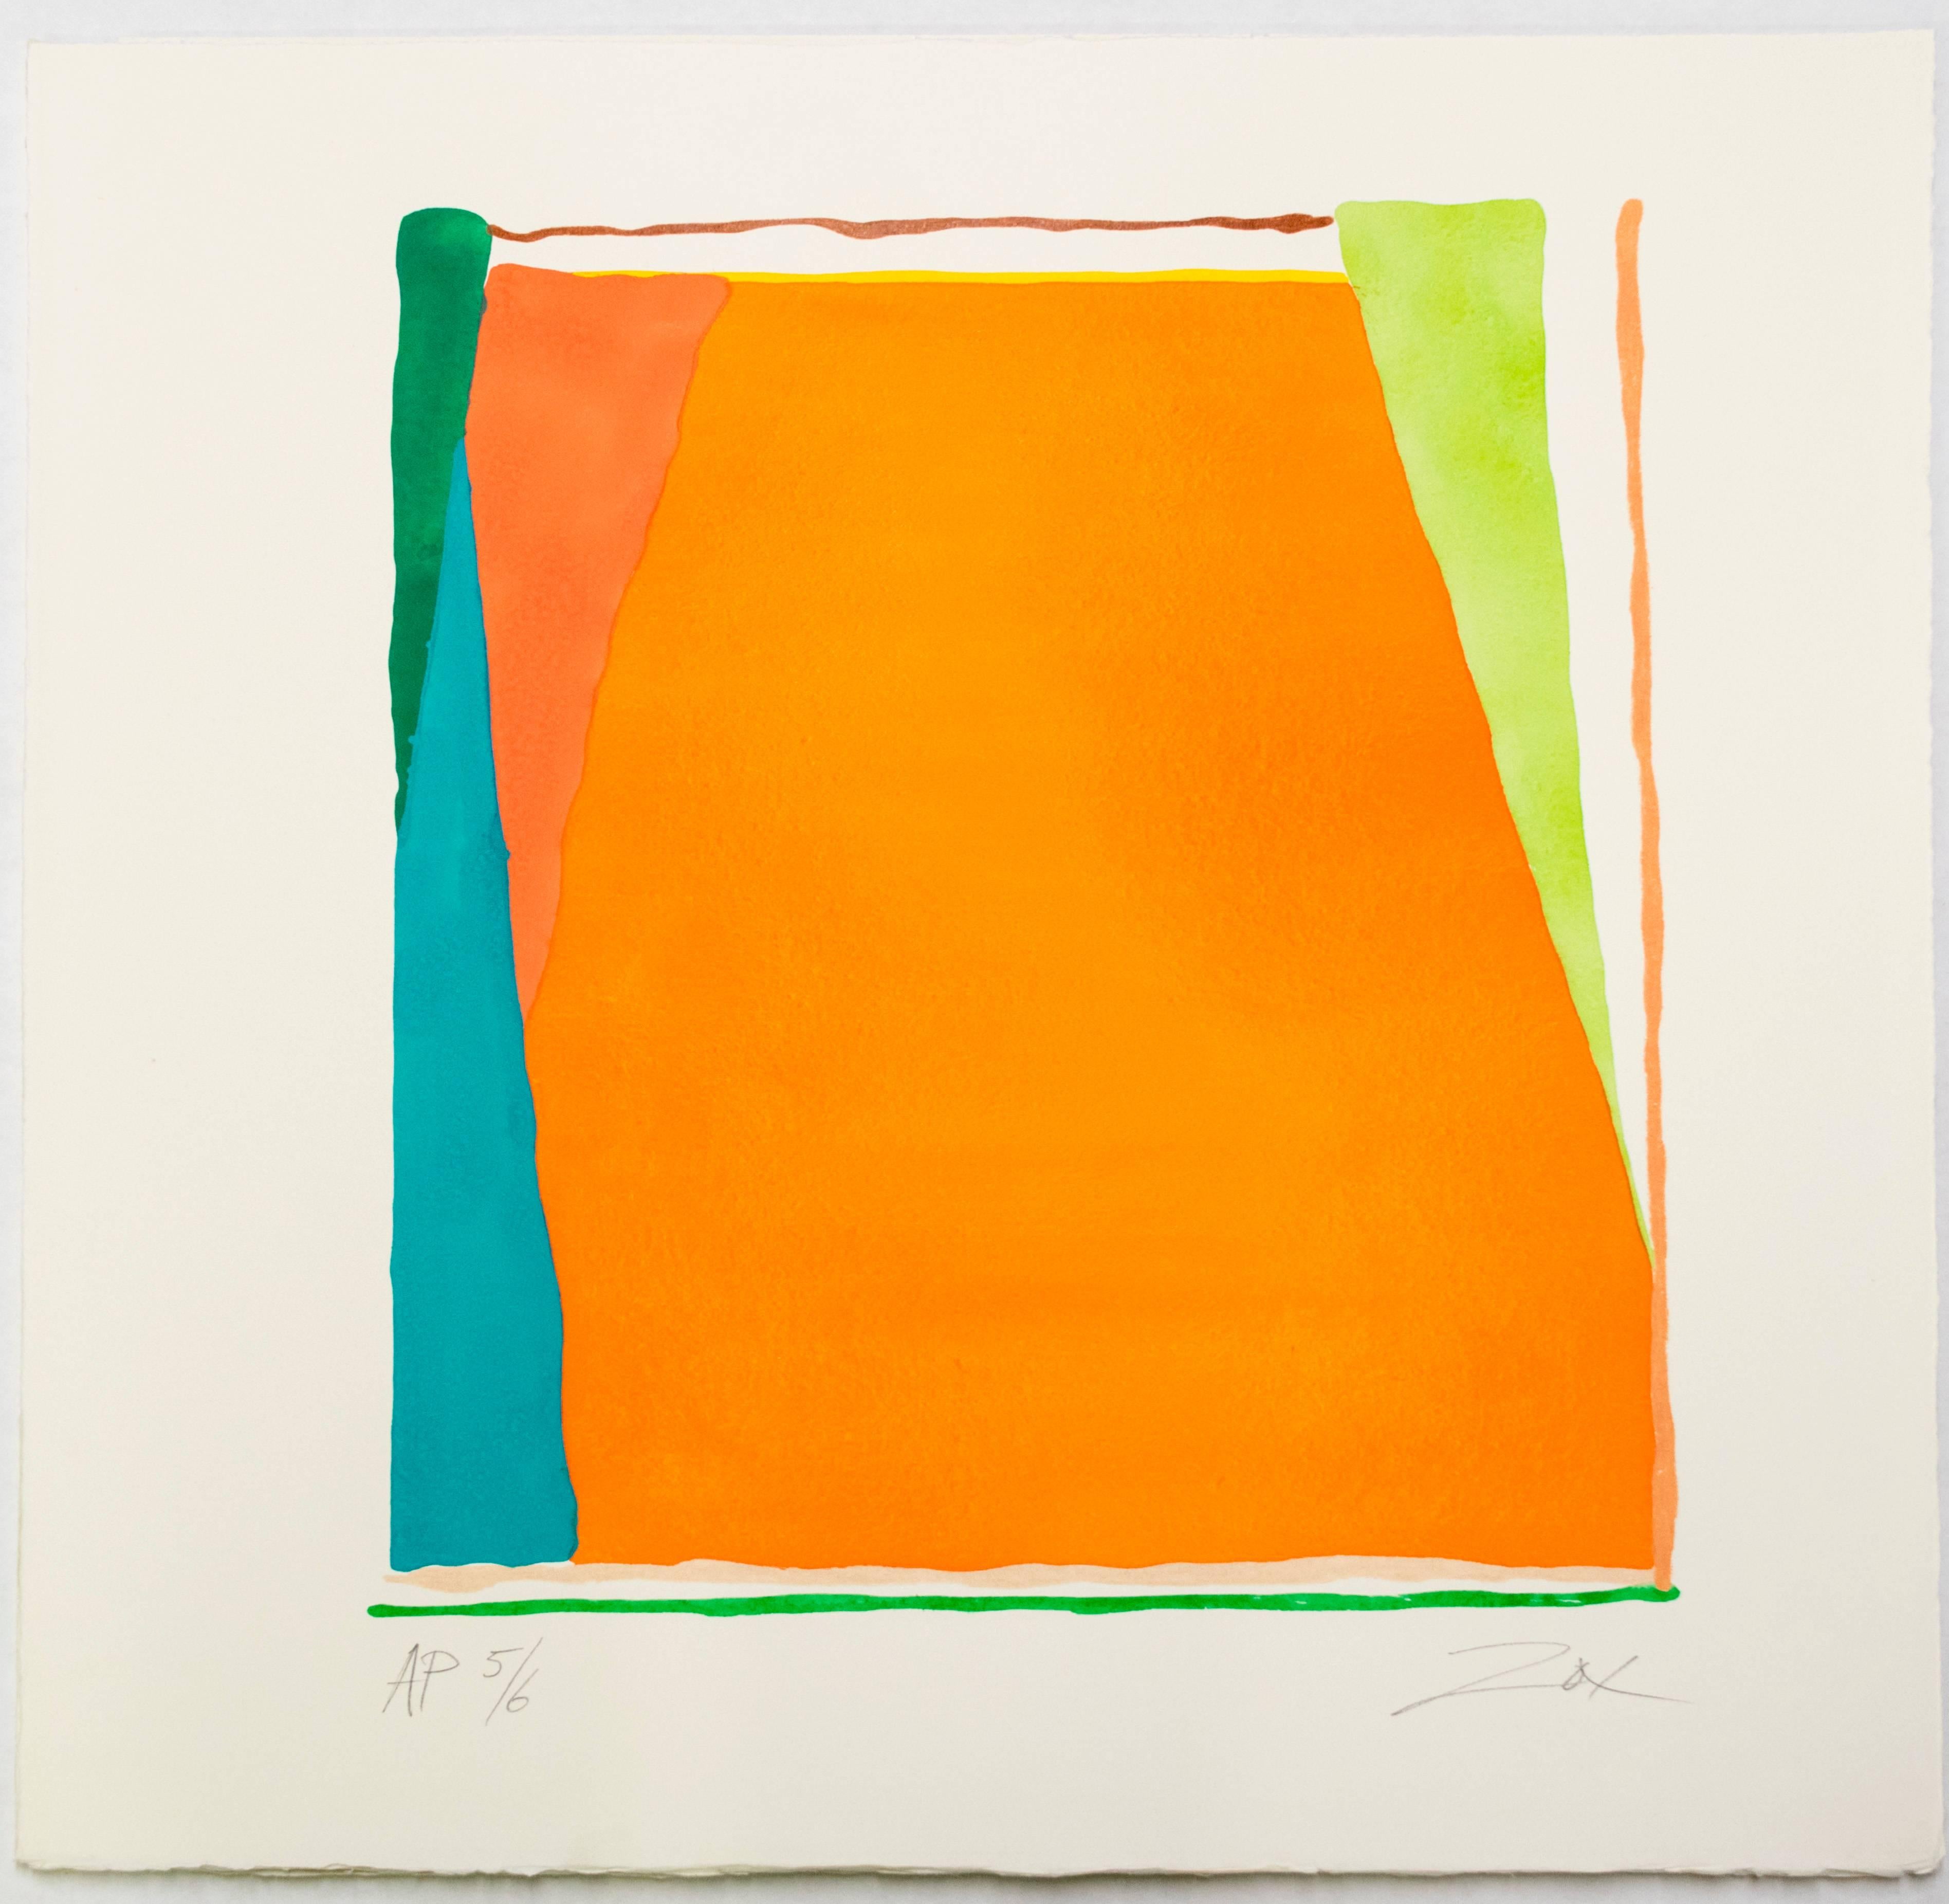 Larry Zox
Untitled (Pochoir I-V) State II, 1976
Suite of five color stencil prints, printed with water-colors and gouache
23 1/8 x 22 in. (58.7 x 55.9 cm.) each
Edition of 20, AP 1/6; except IV (orange) AP 5/6  

Larry Zox was an American Lyrical